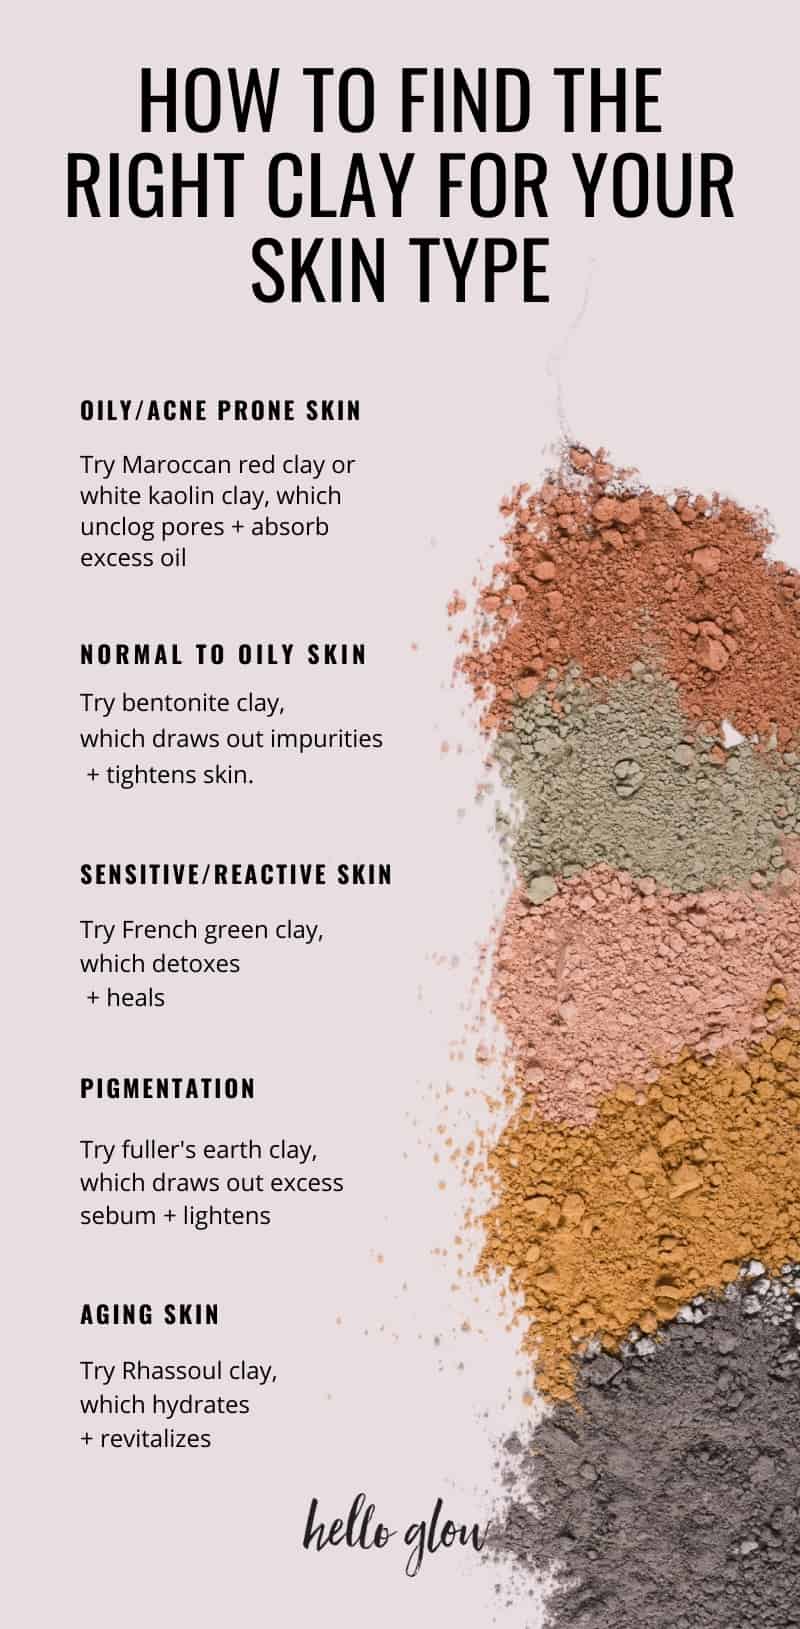 What's the right clay for my skin type? - HelloGlow.co